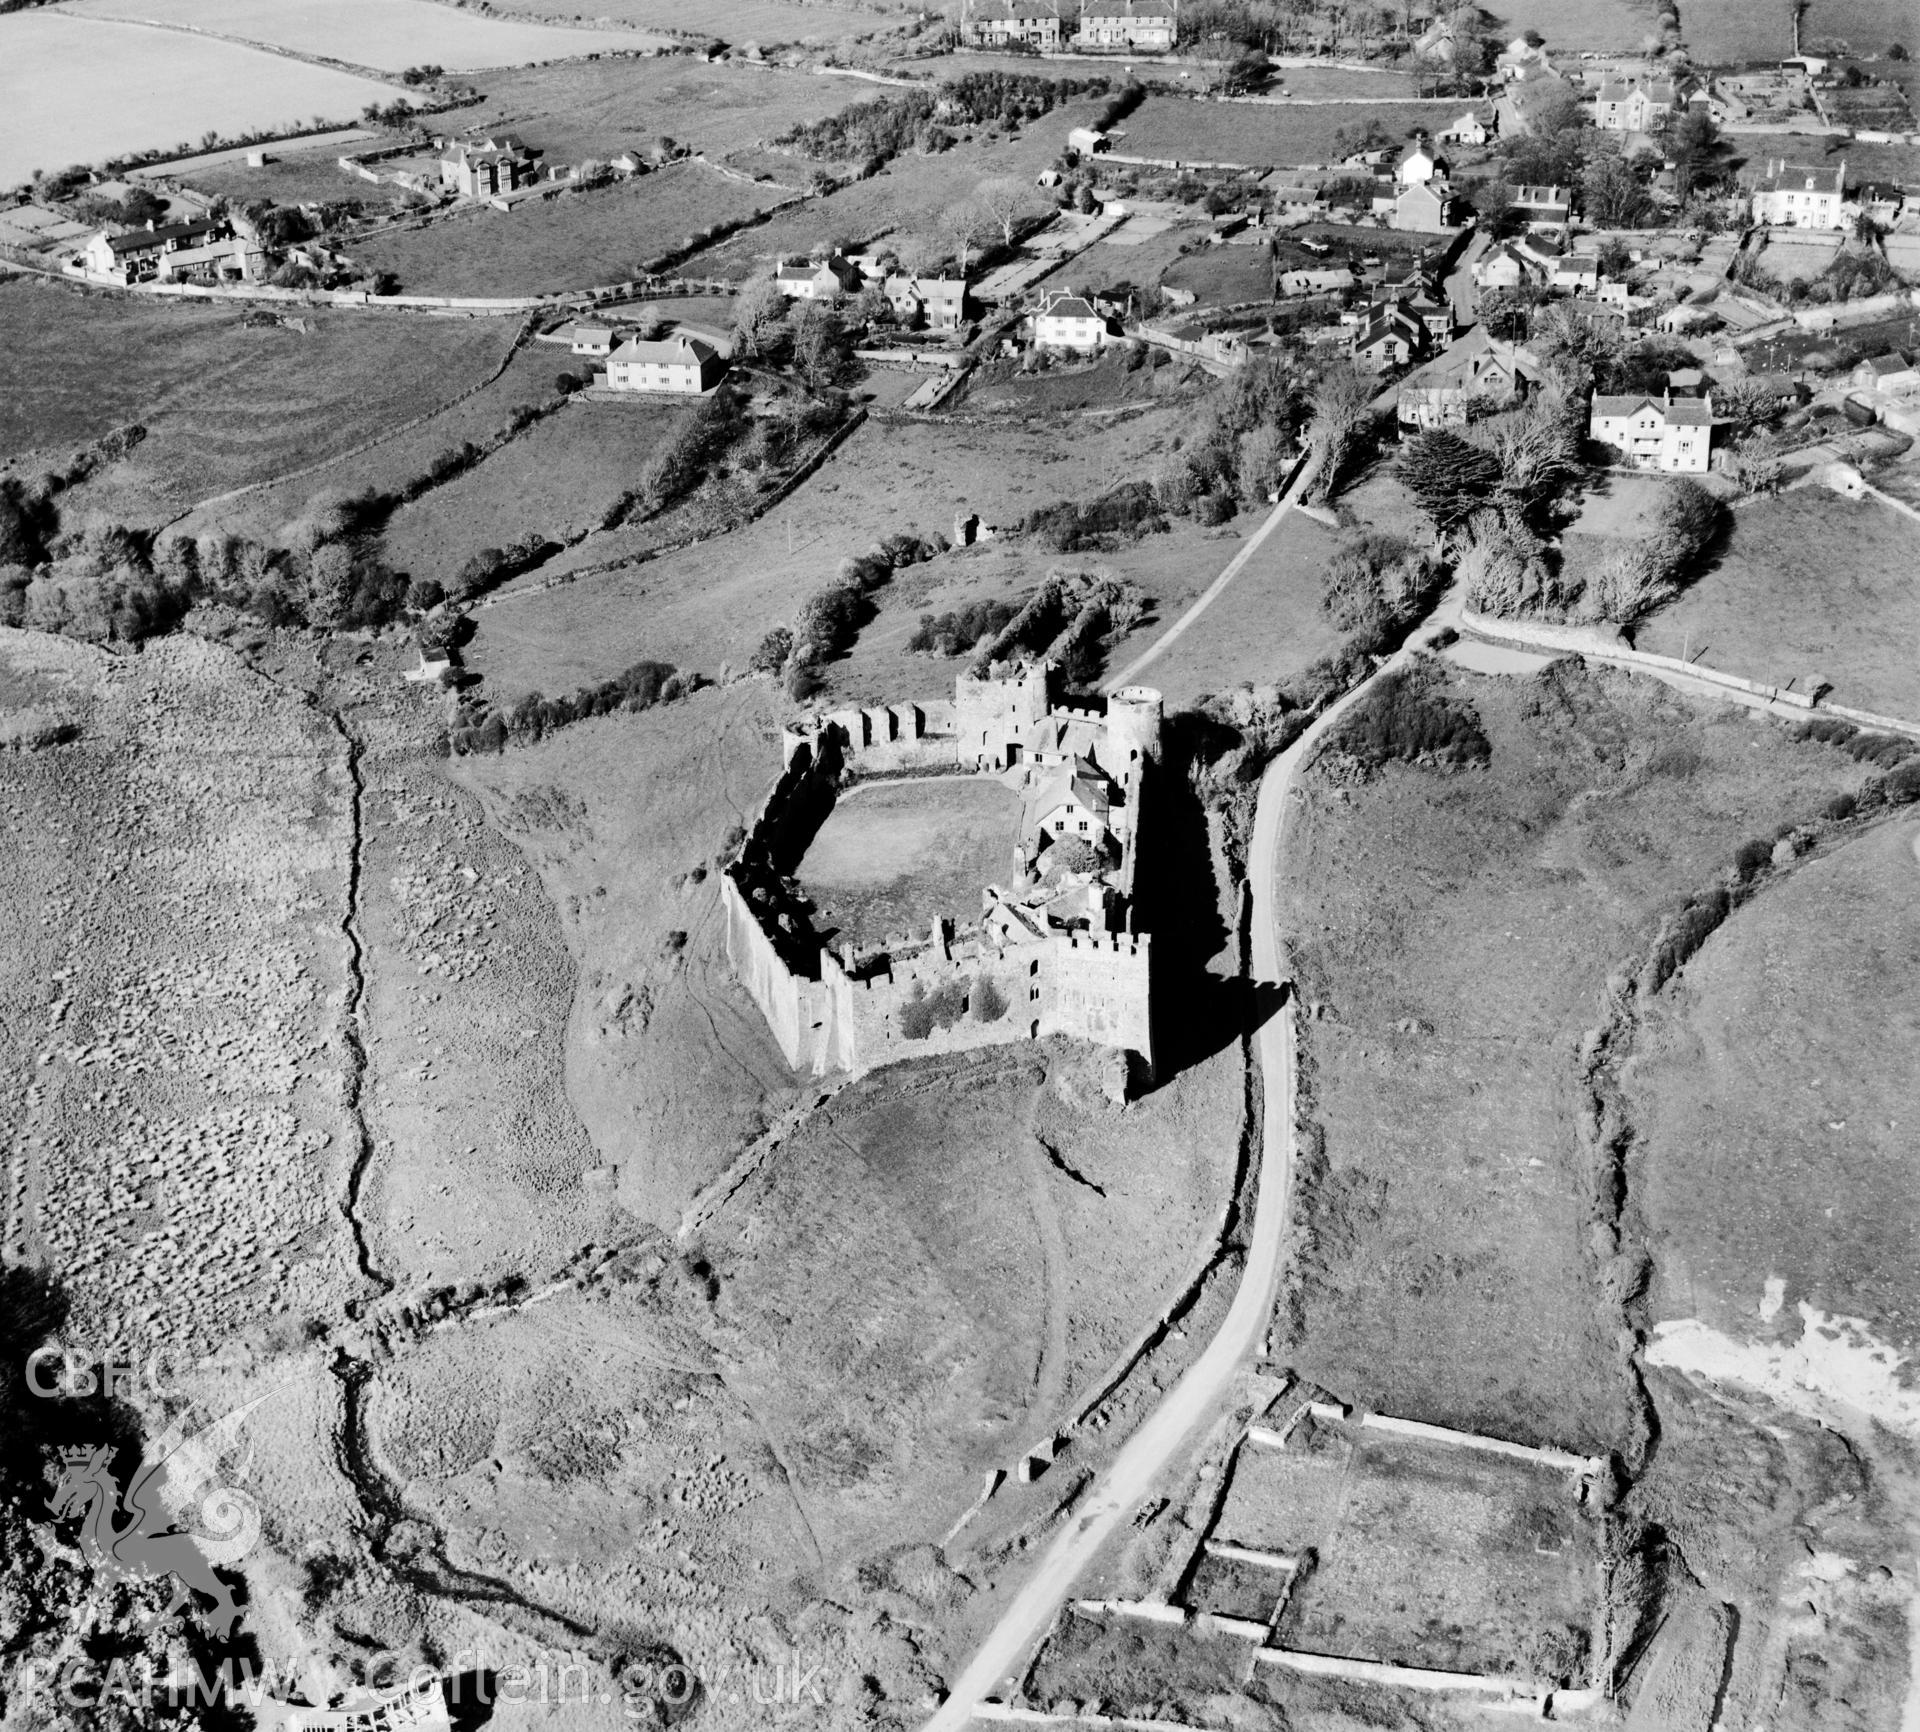 View of Manorbier castle